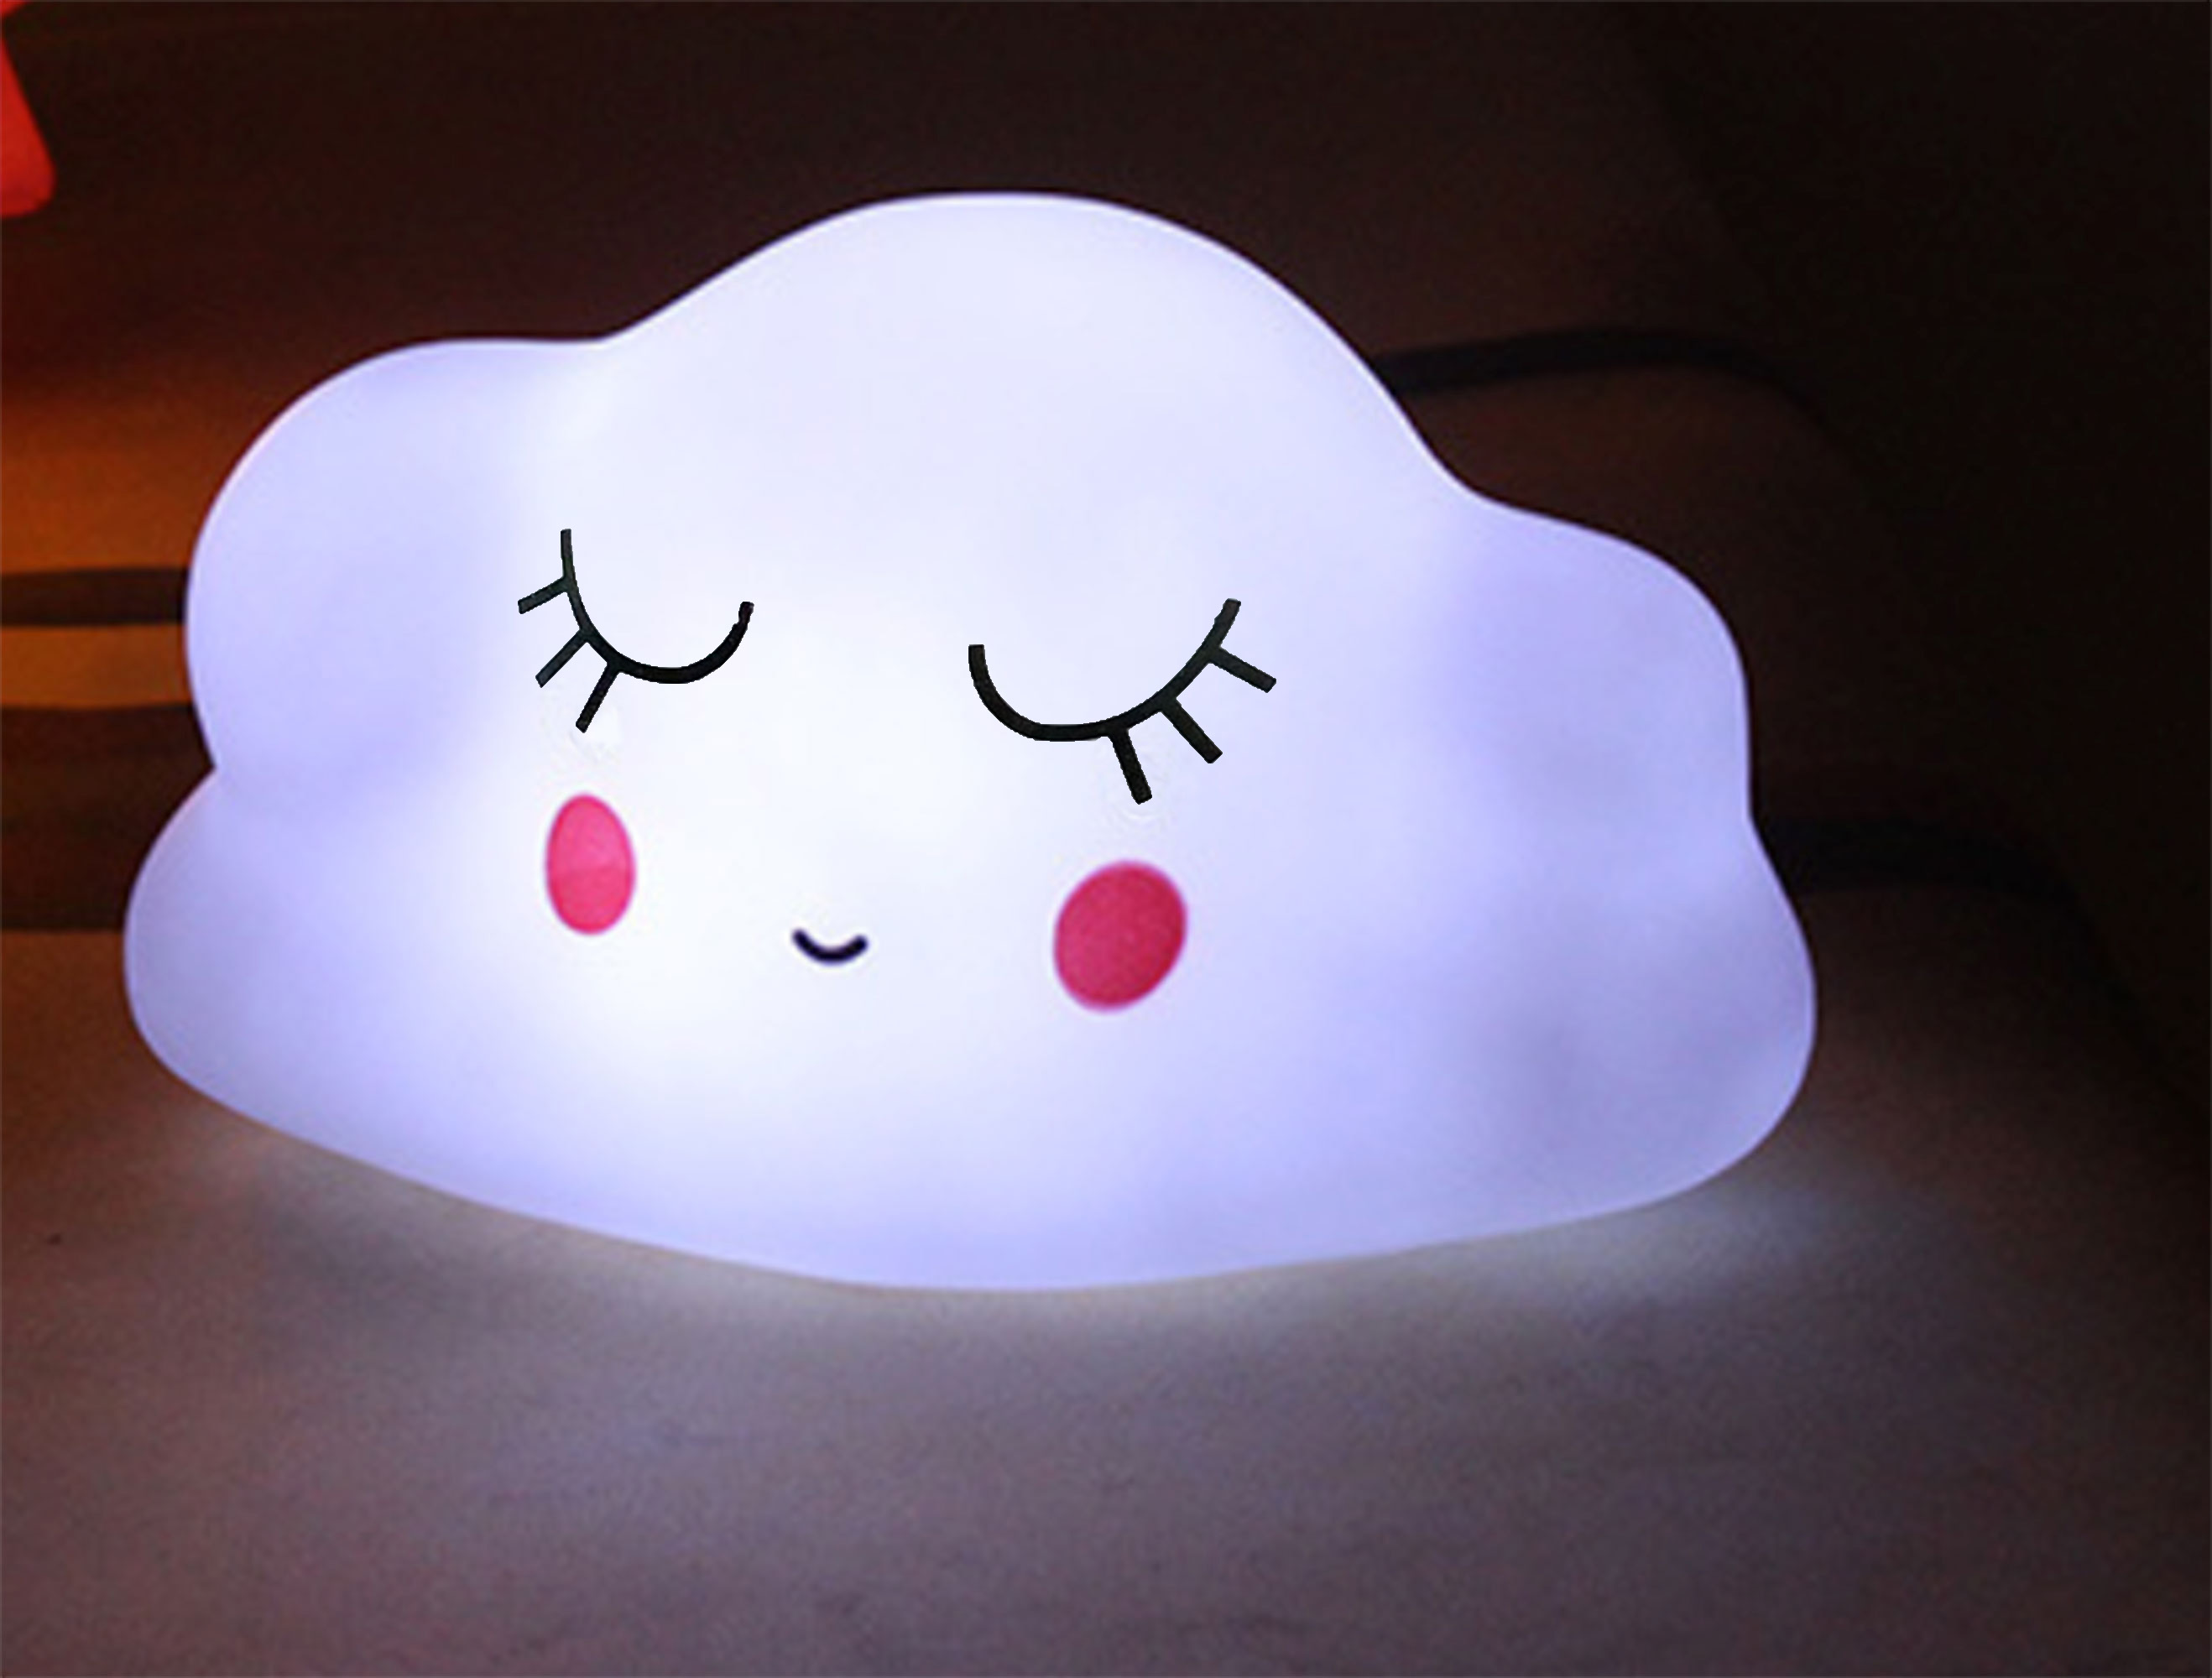 Soft Cloud Light . Kids' night light. Center piece. Happy Light. It comes with 3 Button on/off switch;Product Size: 3.25x6x3.25. Squeezable fun light for any kid and - Walmart.com